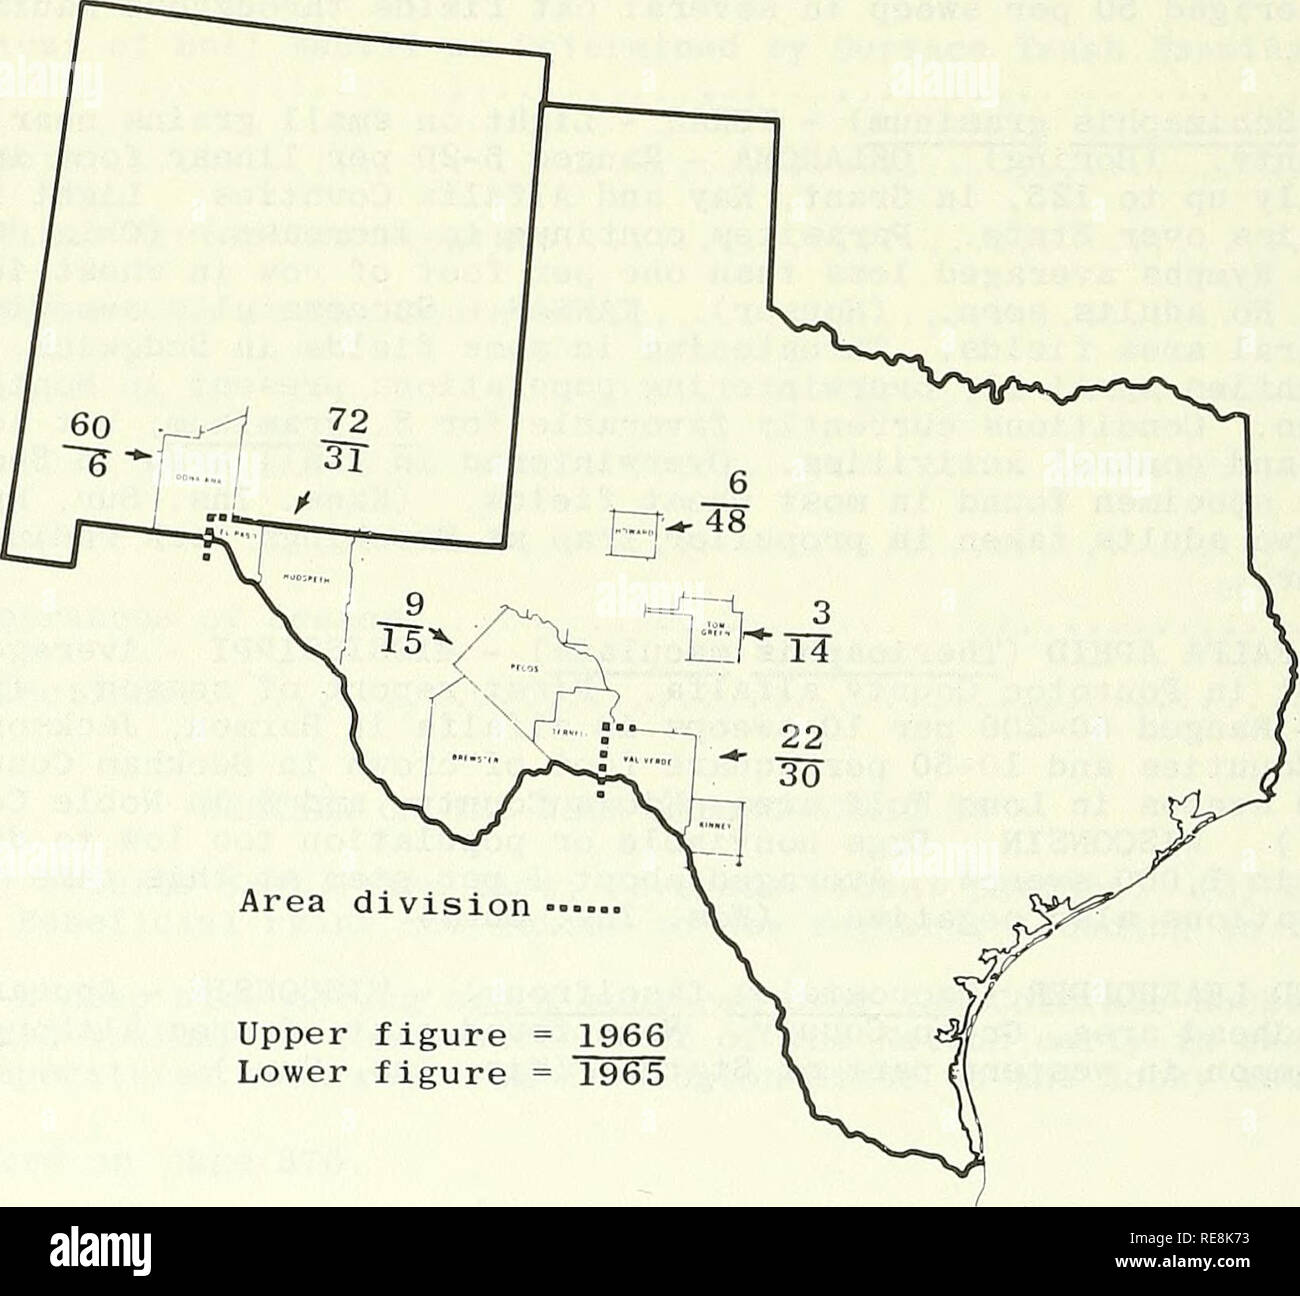 . Cooperative economic insect report. Beneficial insects; Insect pests. - 358 - Potato Psyllld Survey, Spring Breeding Areas of Texas and Southeastern New Mexico The 1966 potato psyllid (Paratrioza cockerelli) survey was completed April 8, 1966. Wild Lycium host plants were extremely late in leafing out this year. The Big Spring&quot;^ San Angelo, Del Rio and Sanderson portions of the survey yielded a very reduced number of potato psyllids, compared to surveys of past years. Lycium is more uniform and in better condition in the El Paso and Las Cruces areas&quot;! Current potato psyllid counts  Stock Photo